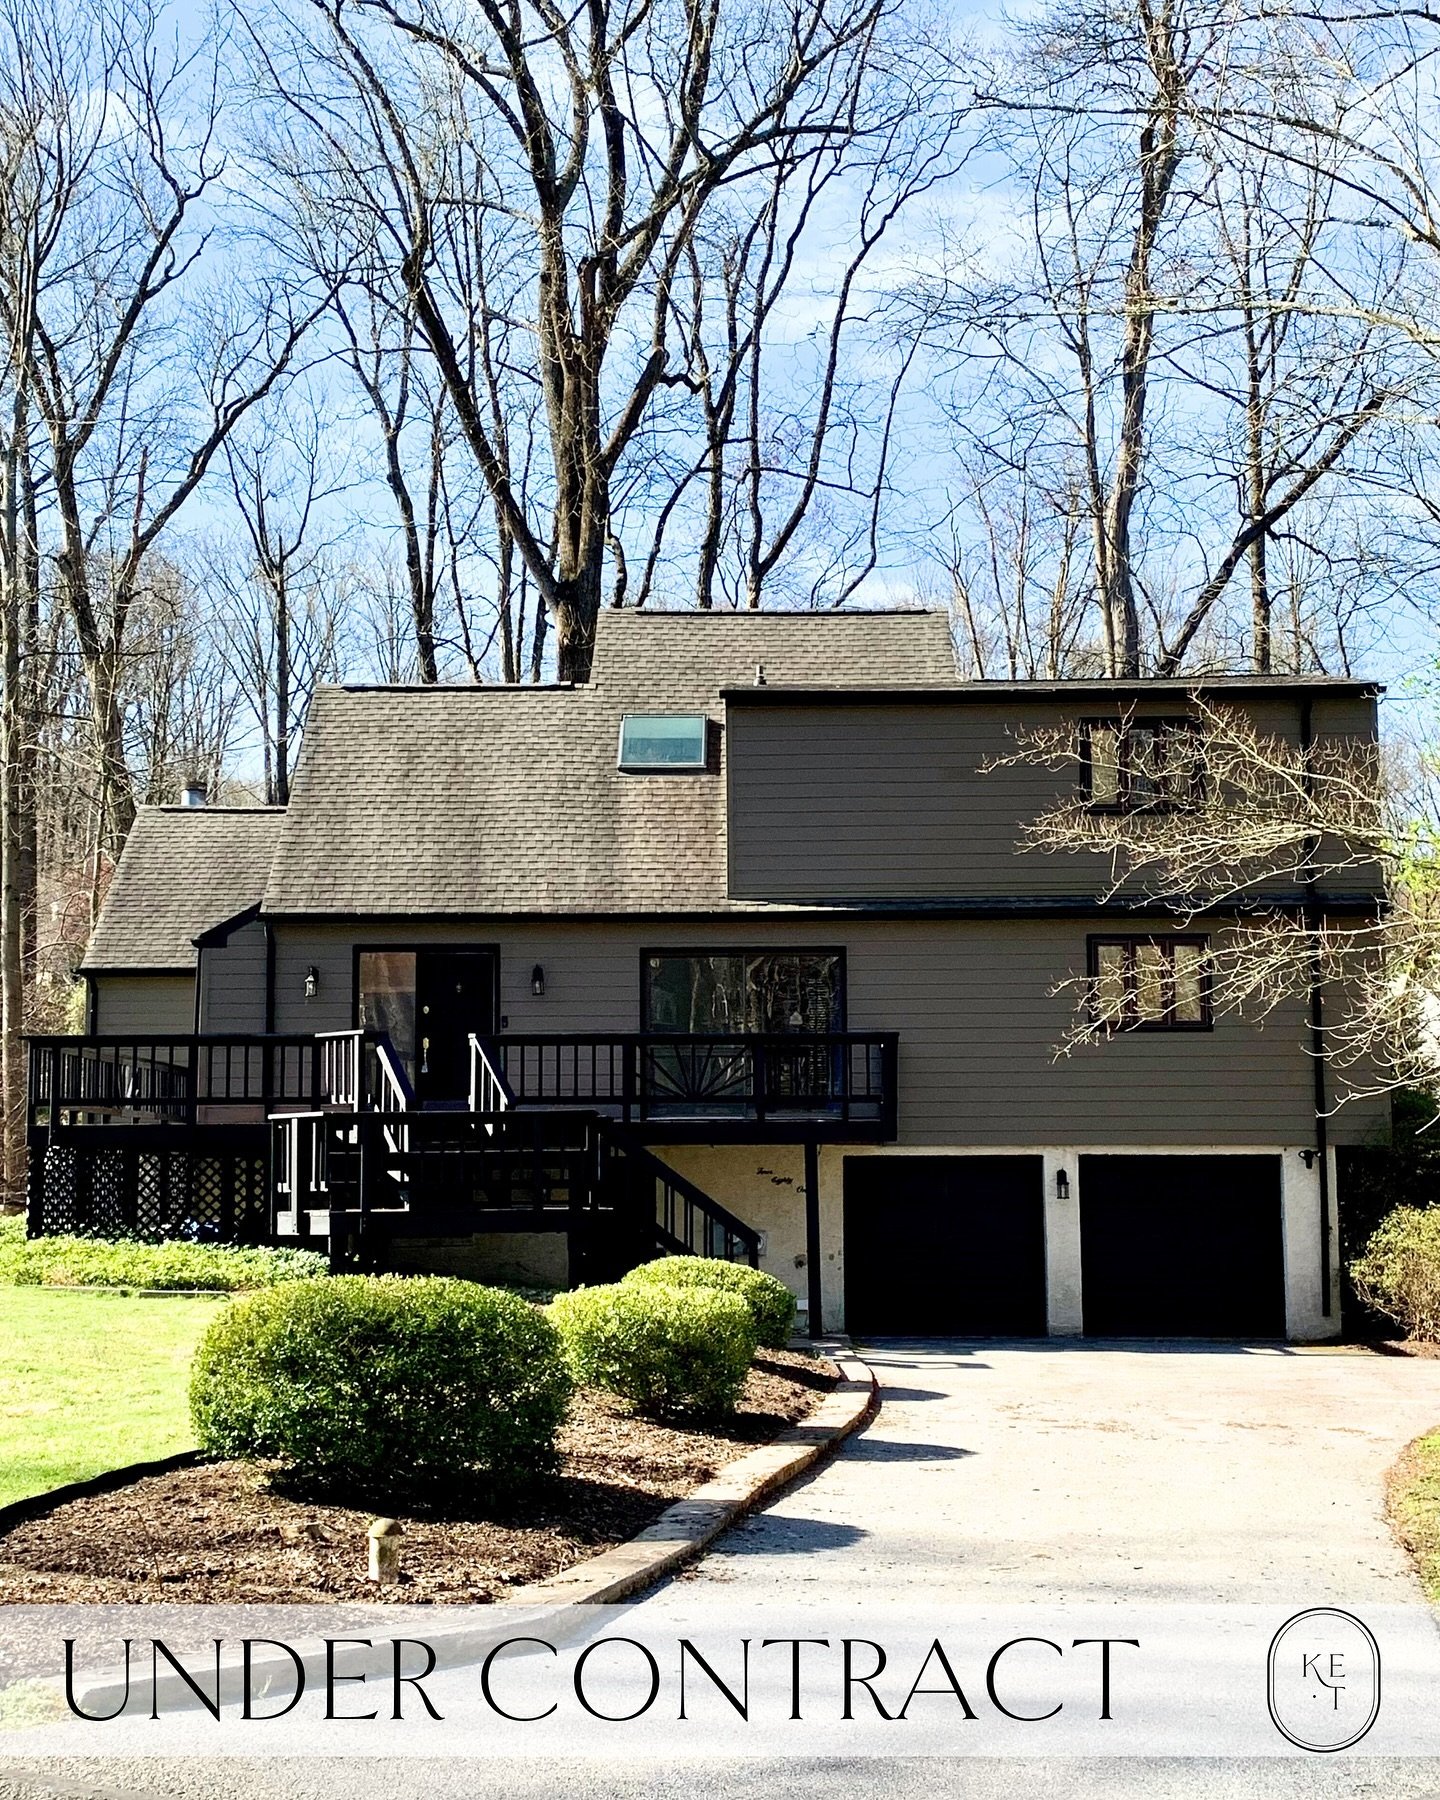 Congratulations to our happy clients who are now under contract on this beautiful home! 🎉🎉

@katieeckteam | Keller Williams 

#katieeckteam #chestercountyrealestate #chestercounty #chestercountypa #chesco #chescopa #chestersprings #chesterspringspa